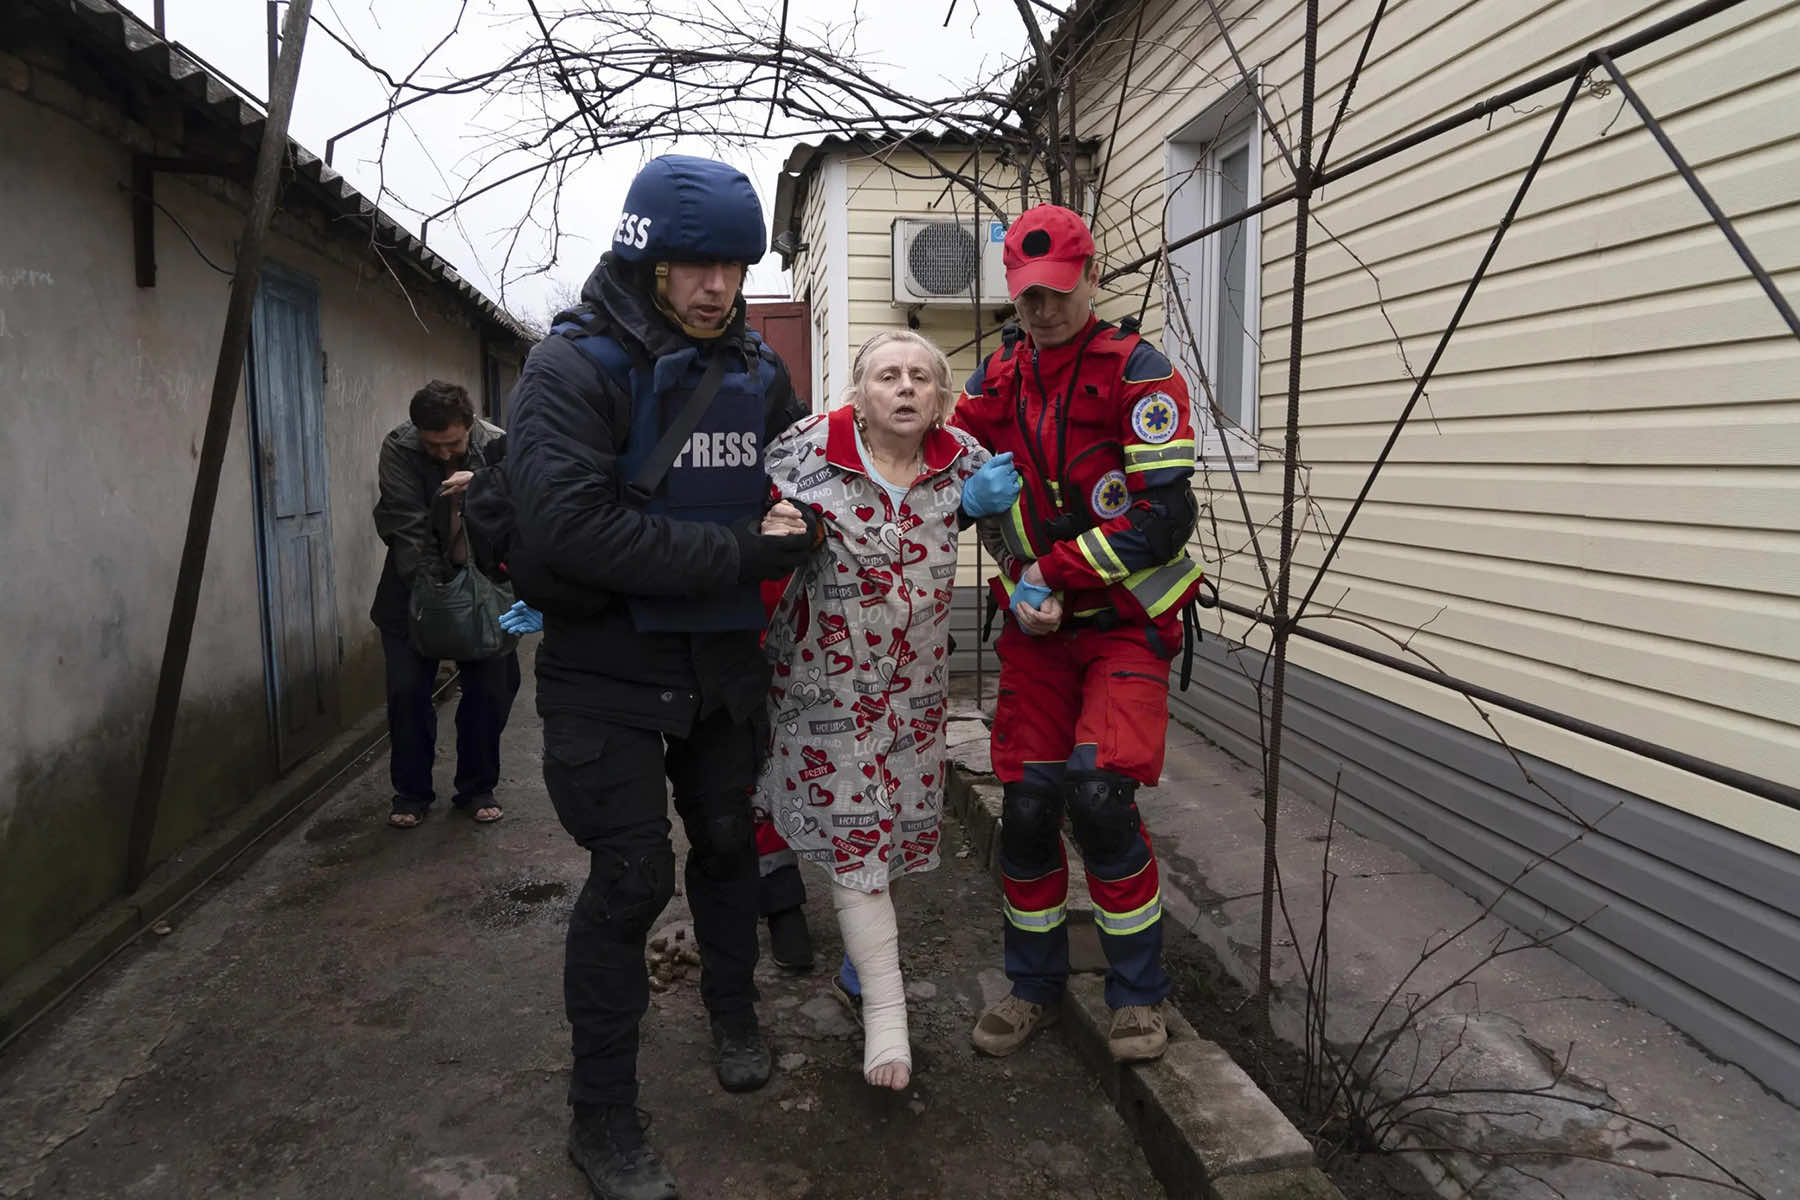 20-days-in-mariupol-how-journalism-illuminated-the-horrors-of-war-in